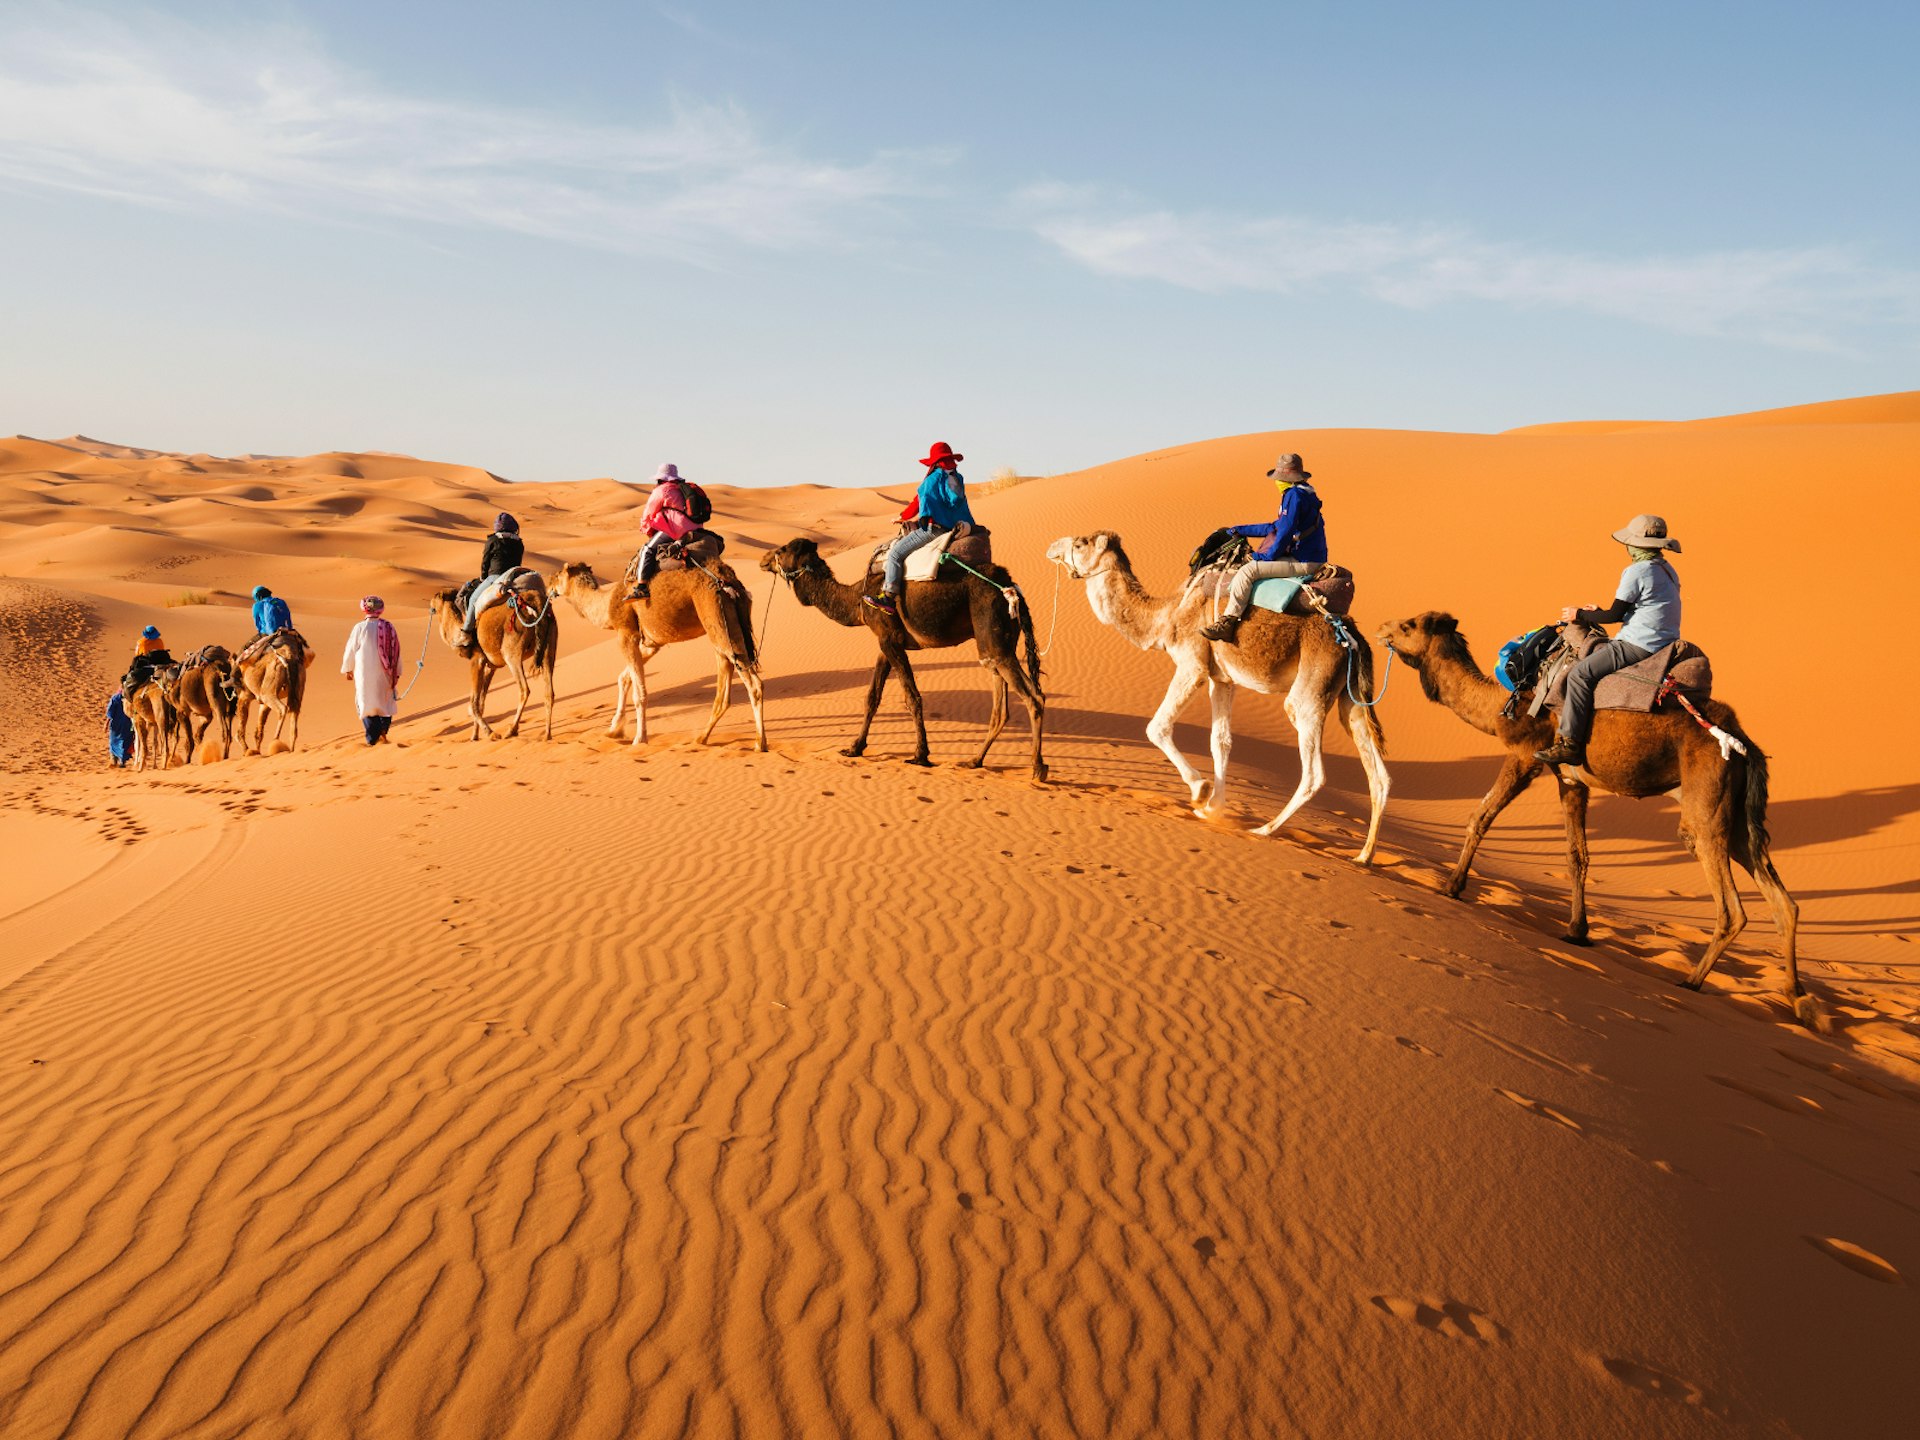 A caravan of camels travelling across the dune of the Sahara Desert, Morocco